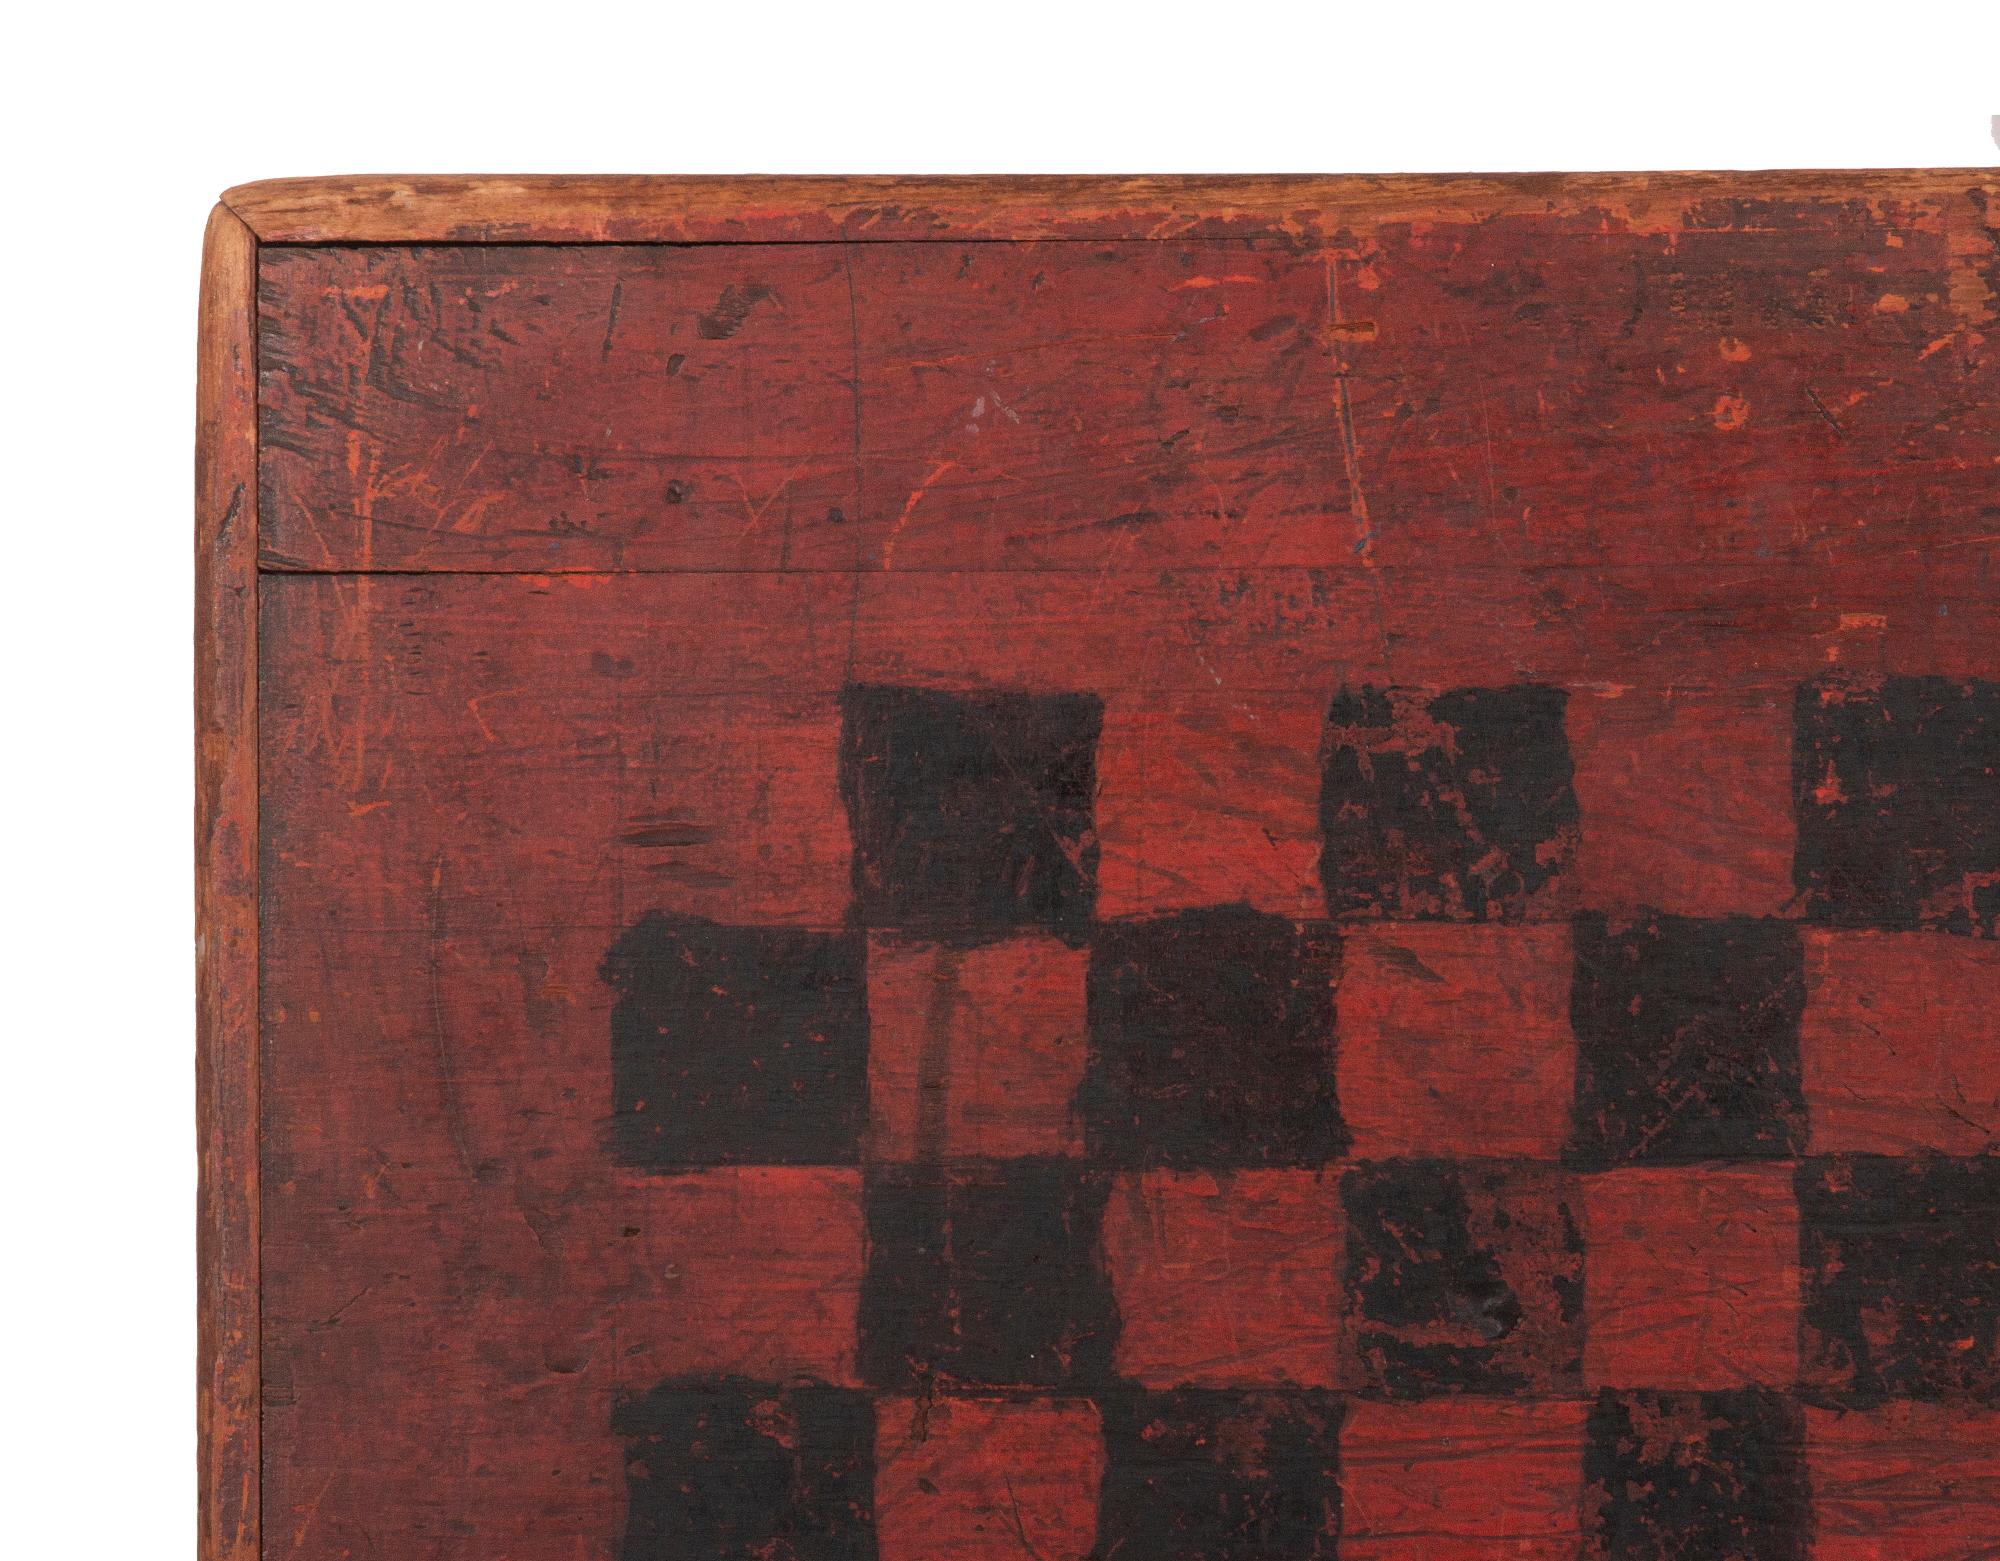 American Parcheesi Board in Salmon & Black Paint, with dutch style pinwheel decoration, exceptional surface, great graphics, and impressive scale, circa 1830-1850

19th century American Parcheesi game board in salmon red paint, with a black grid